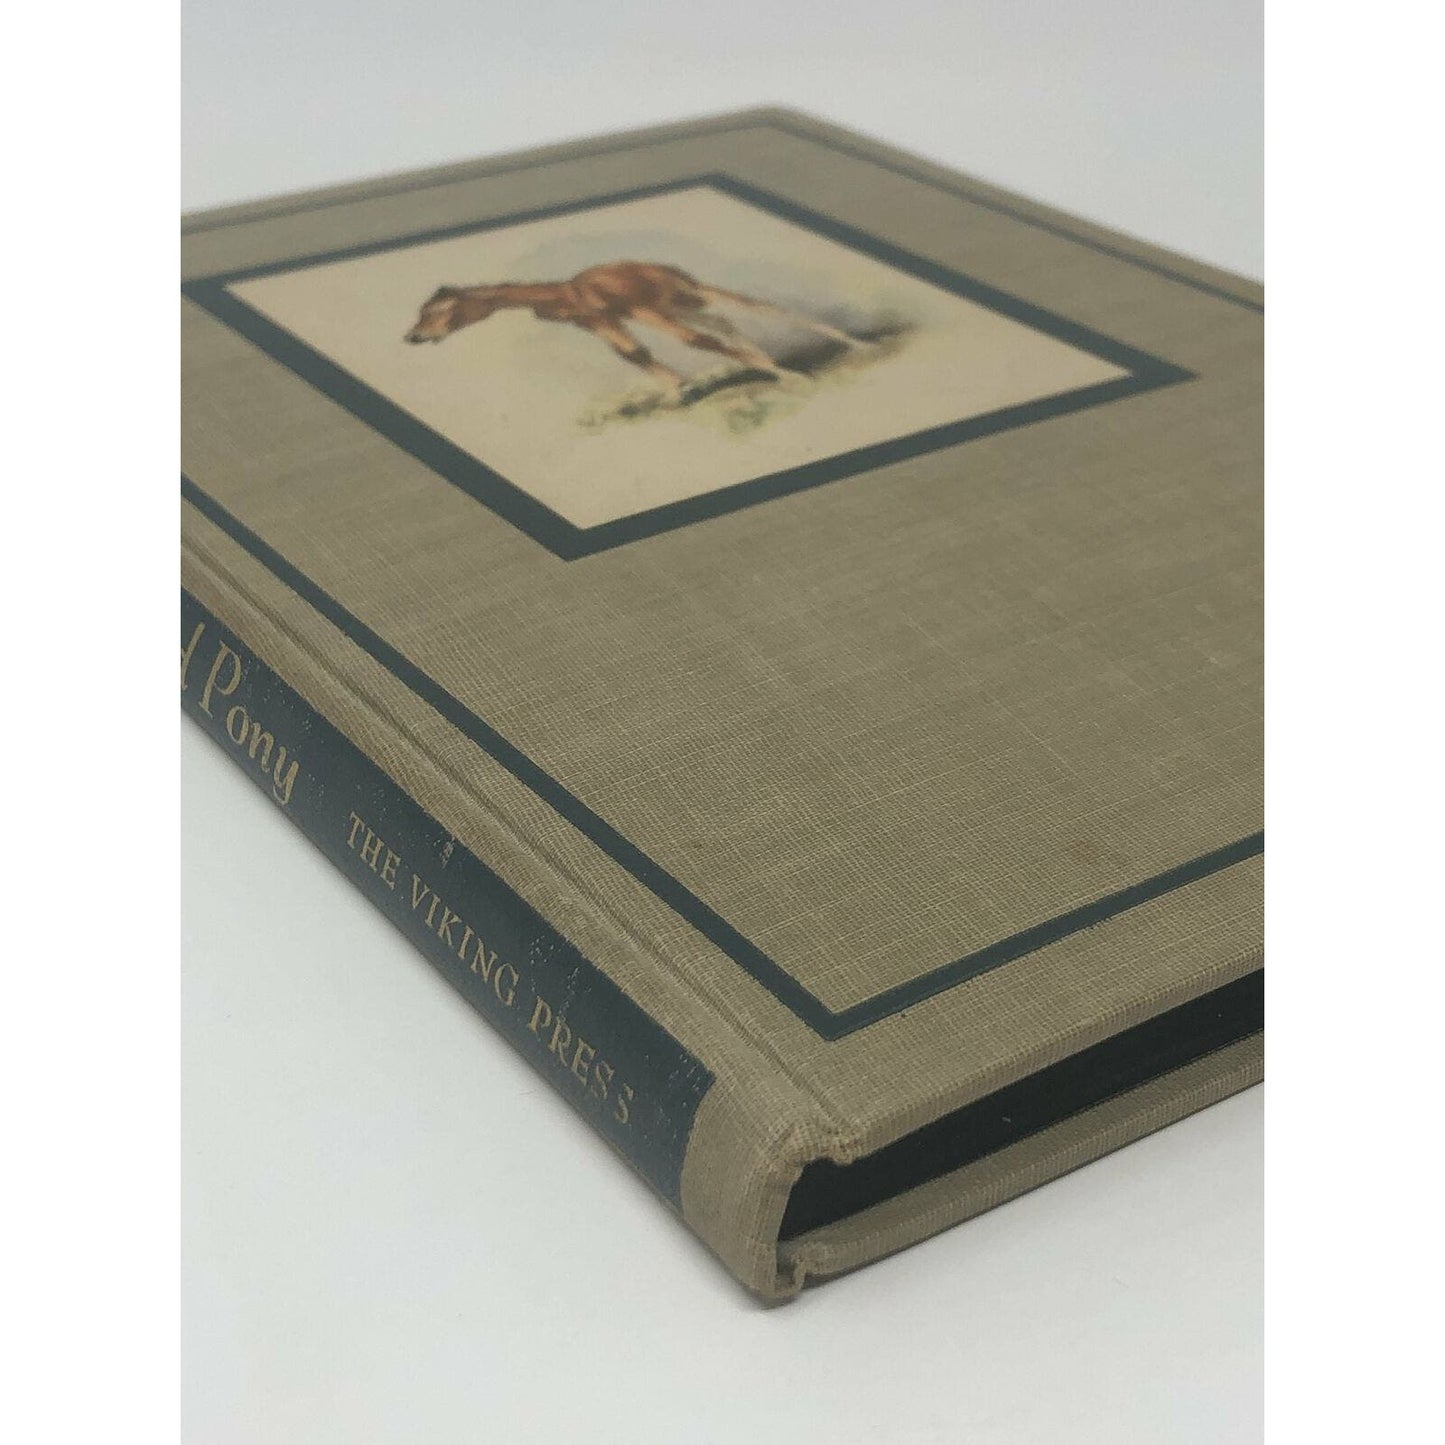 THE RED PONY by John Steinbeck ~ 1948 Illustrated Edition - Uncle Buddy's Beard & Used Books